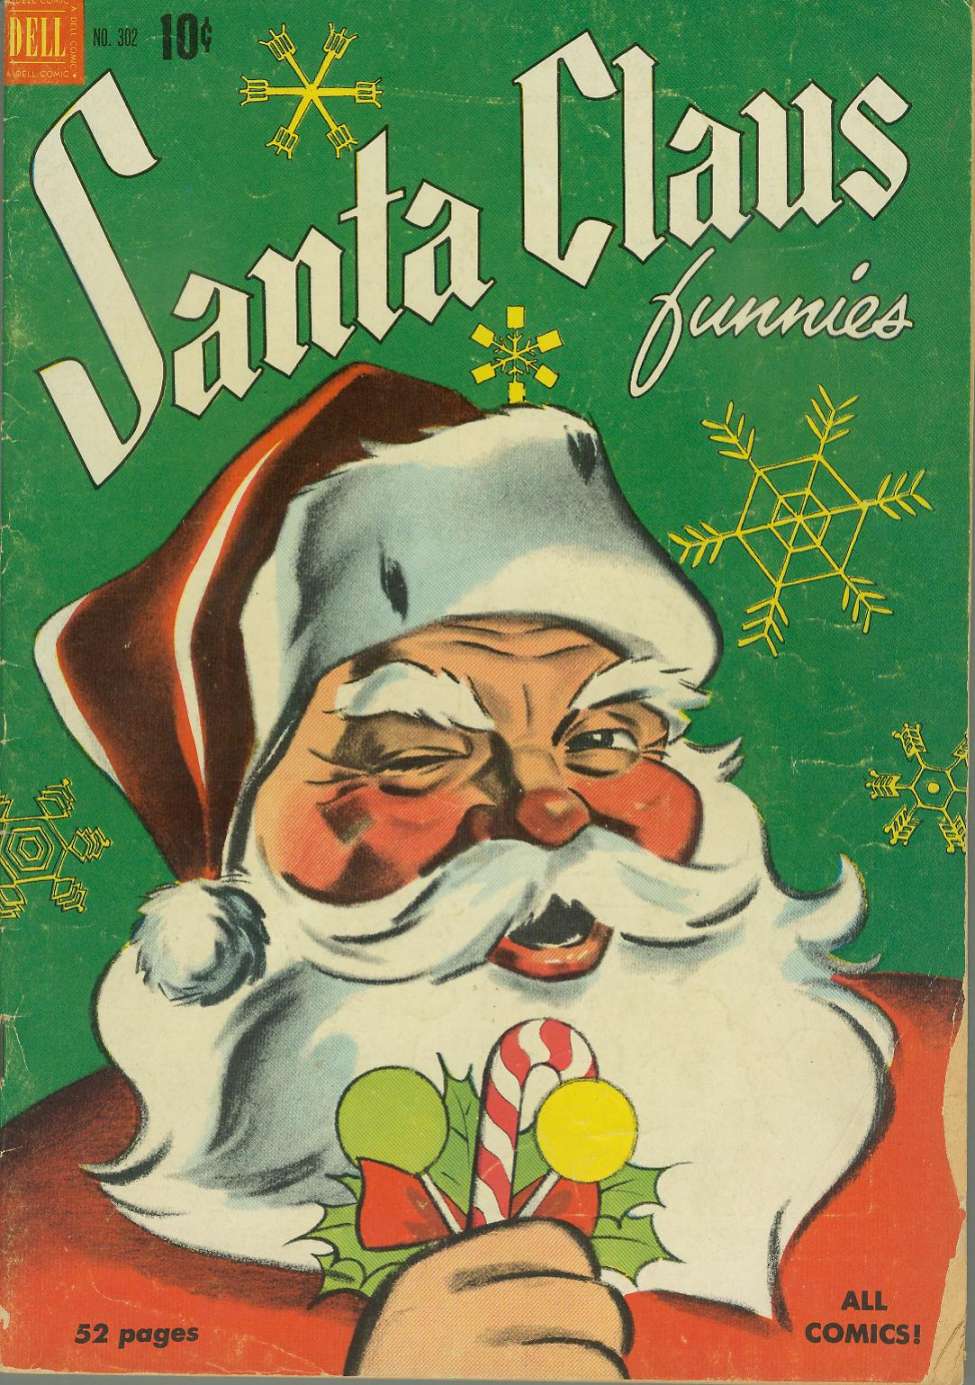 Book Cover For 0302 - Santa Claus Funnies - Version 1